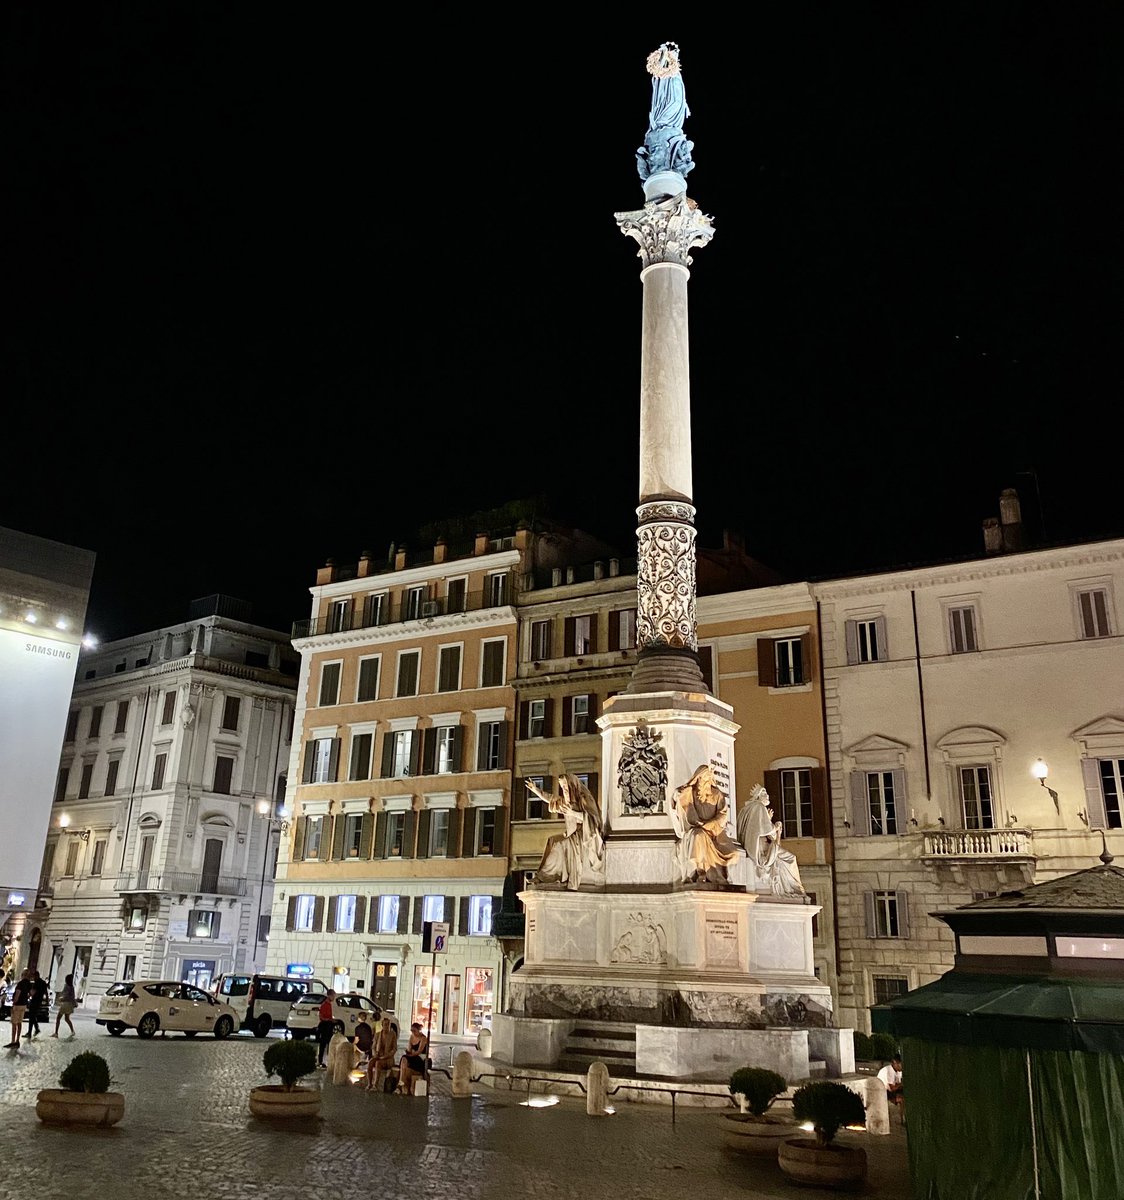 Rome, we are staying near the Piazza Navona, so magical at night 🌚 #magicalcity #Rome #italiancities #weloverome #italianarchitecture